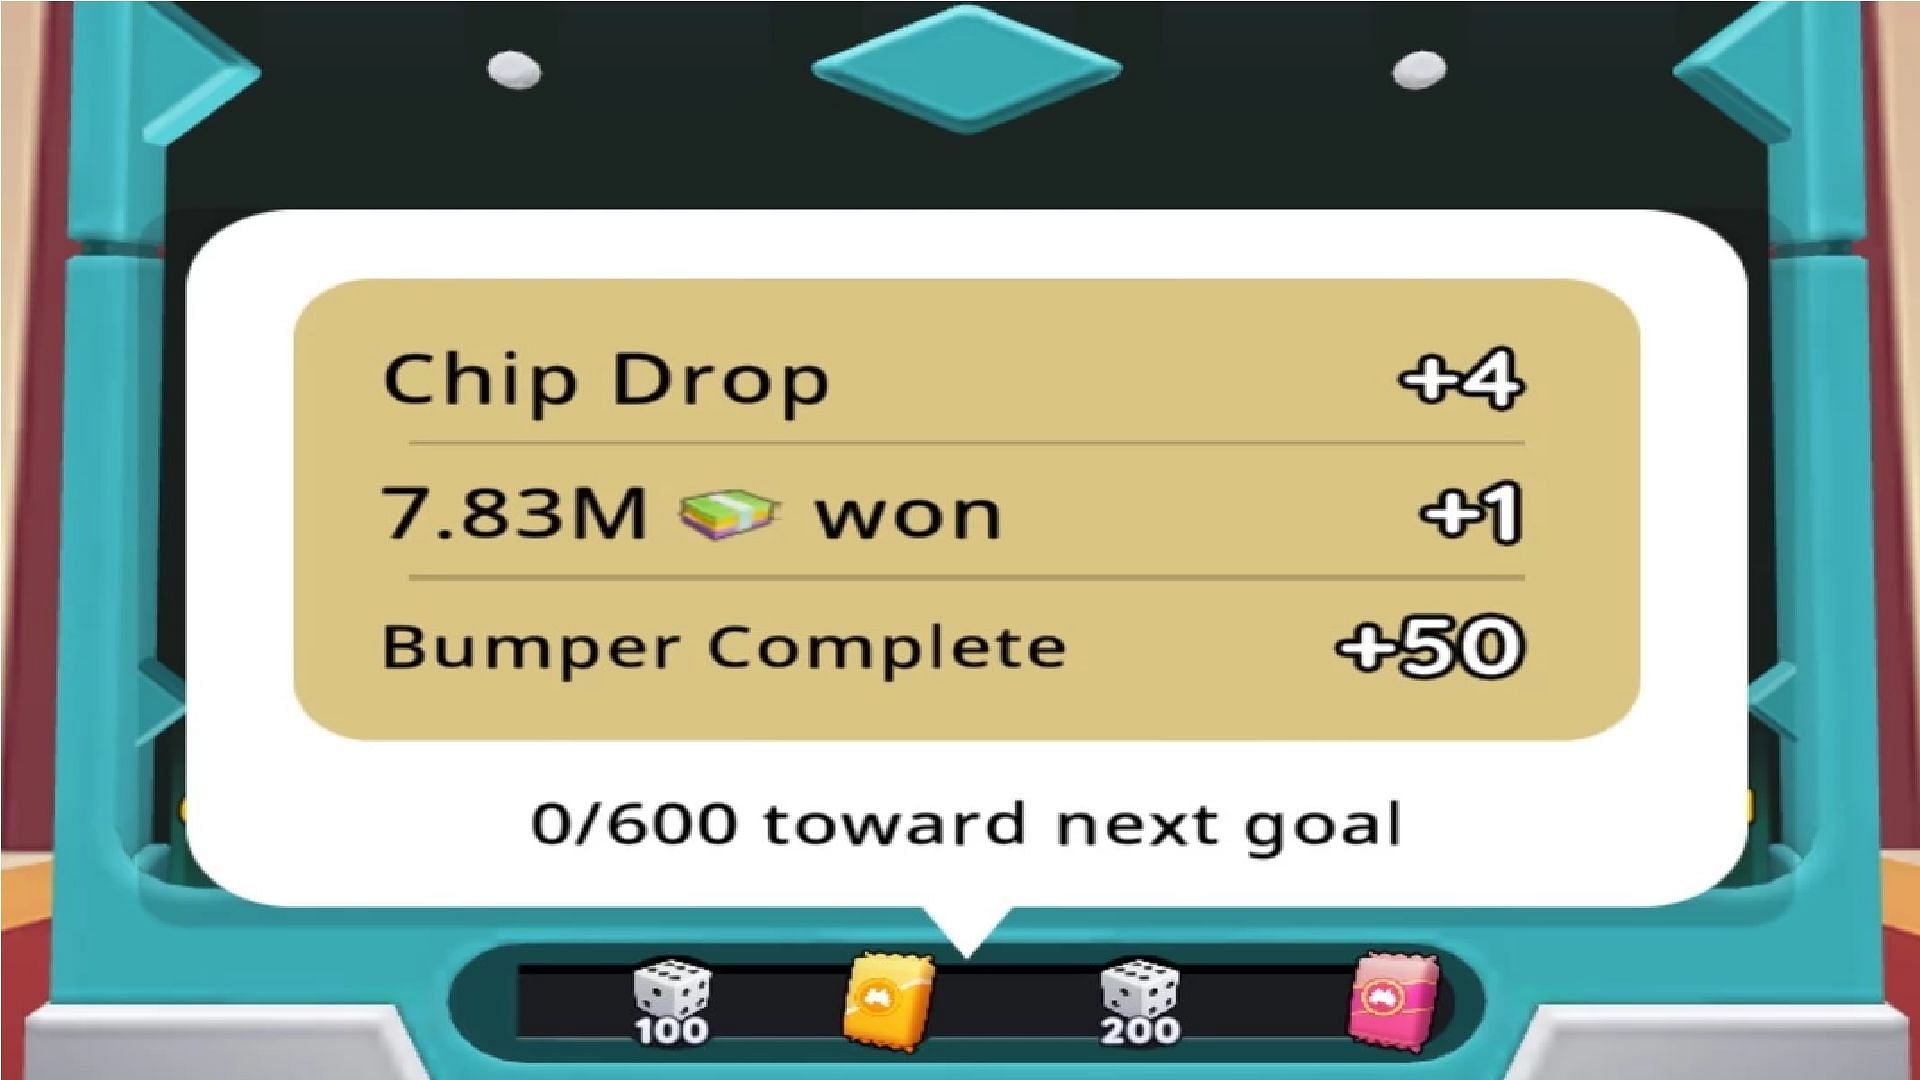 The Peg-E Prize Drop event brings a lot of amazing rewards [Image from the previous event] (Image via Scopely)